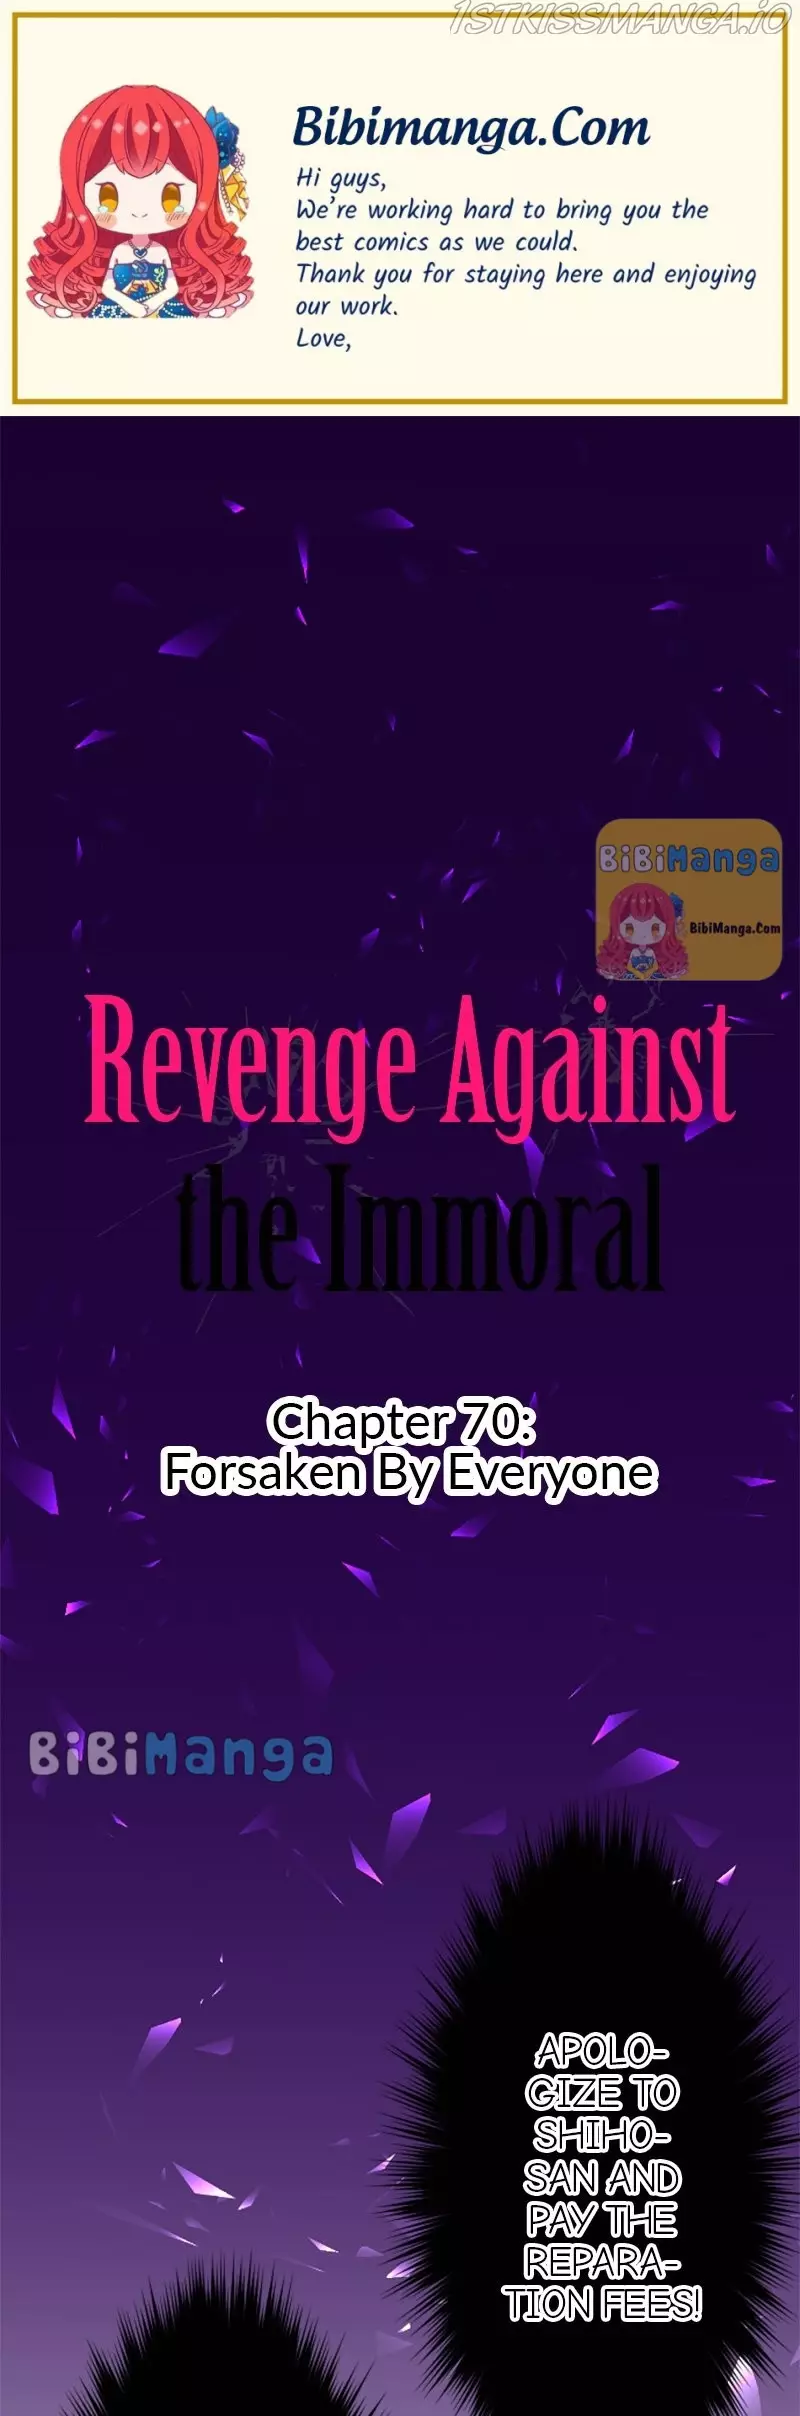 Revenge Against The Immoral - 70 page 1-16fc9e7b